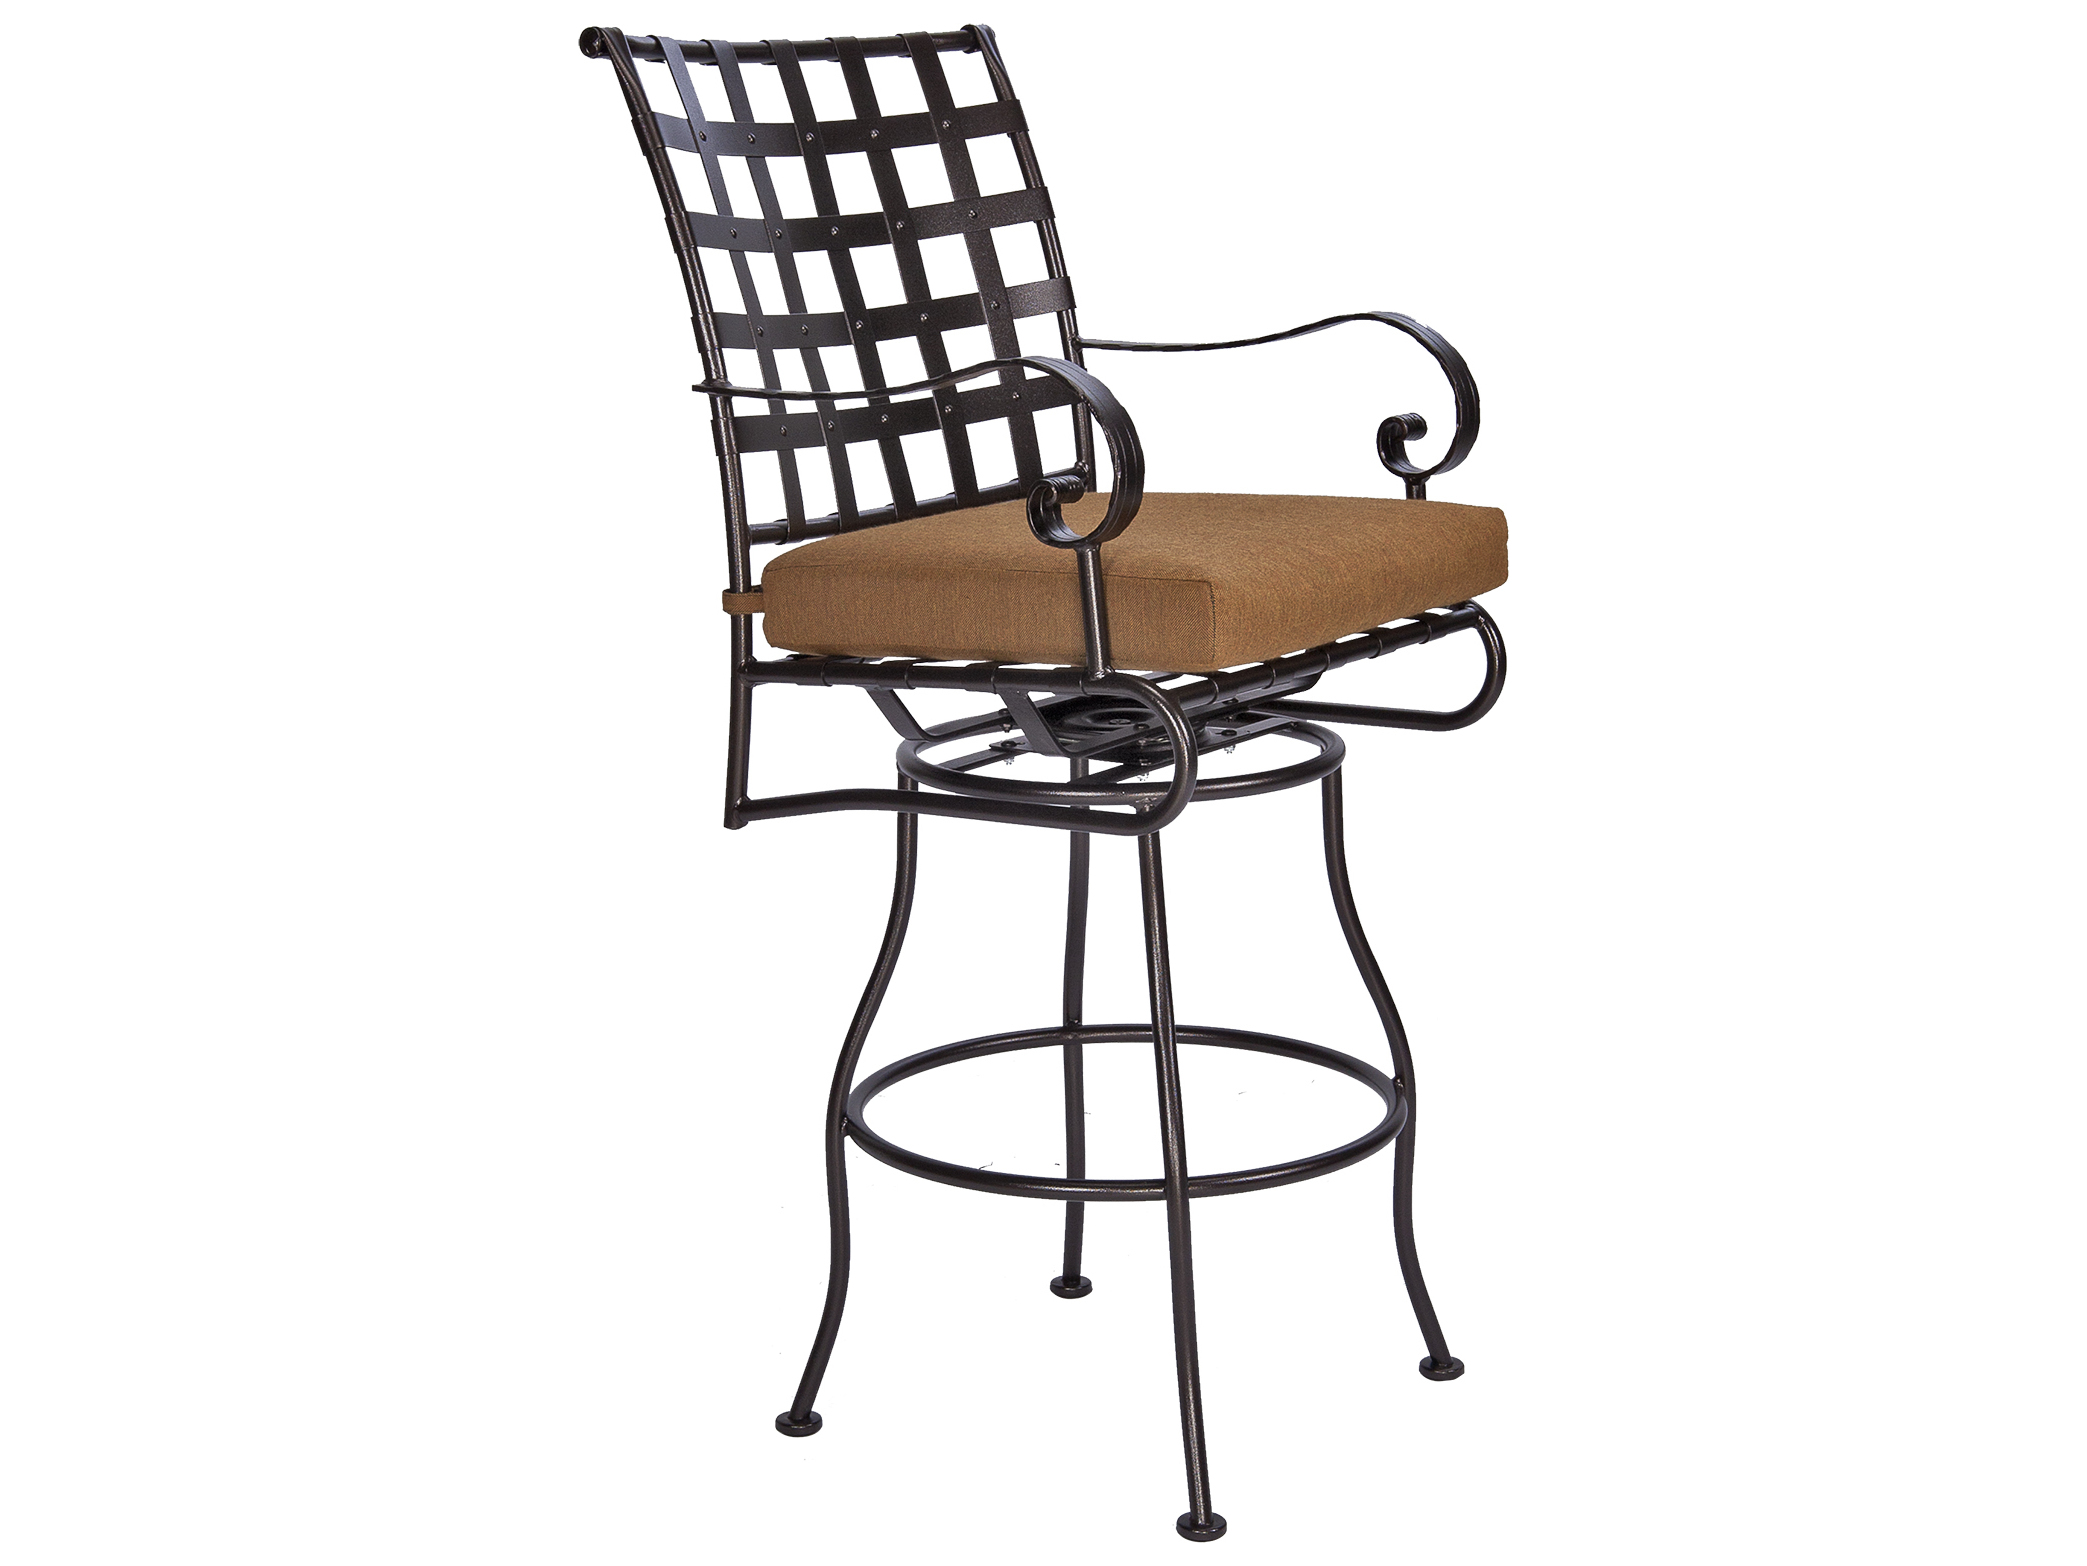 Ow Lee Classico Wide Arms Wrought Iron Swivel Bar Stool Ow953sbsw